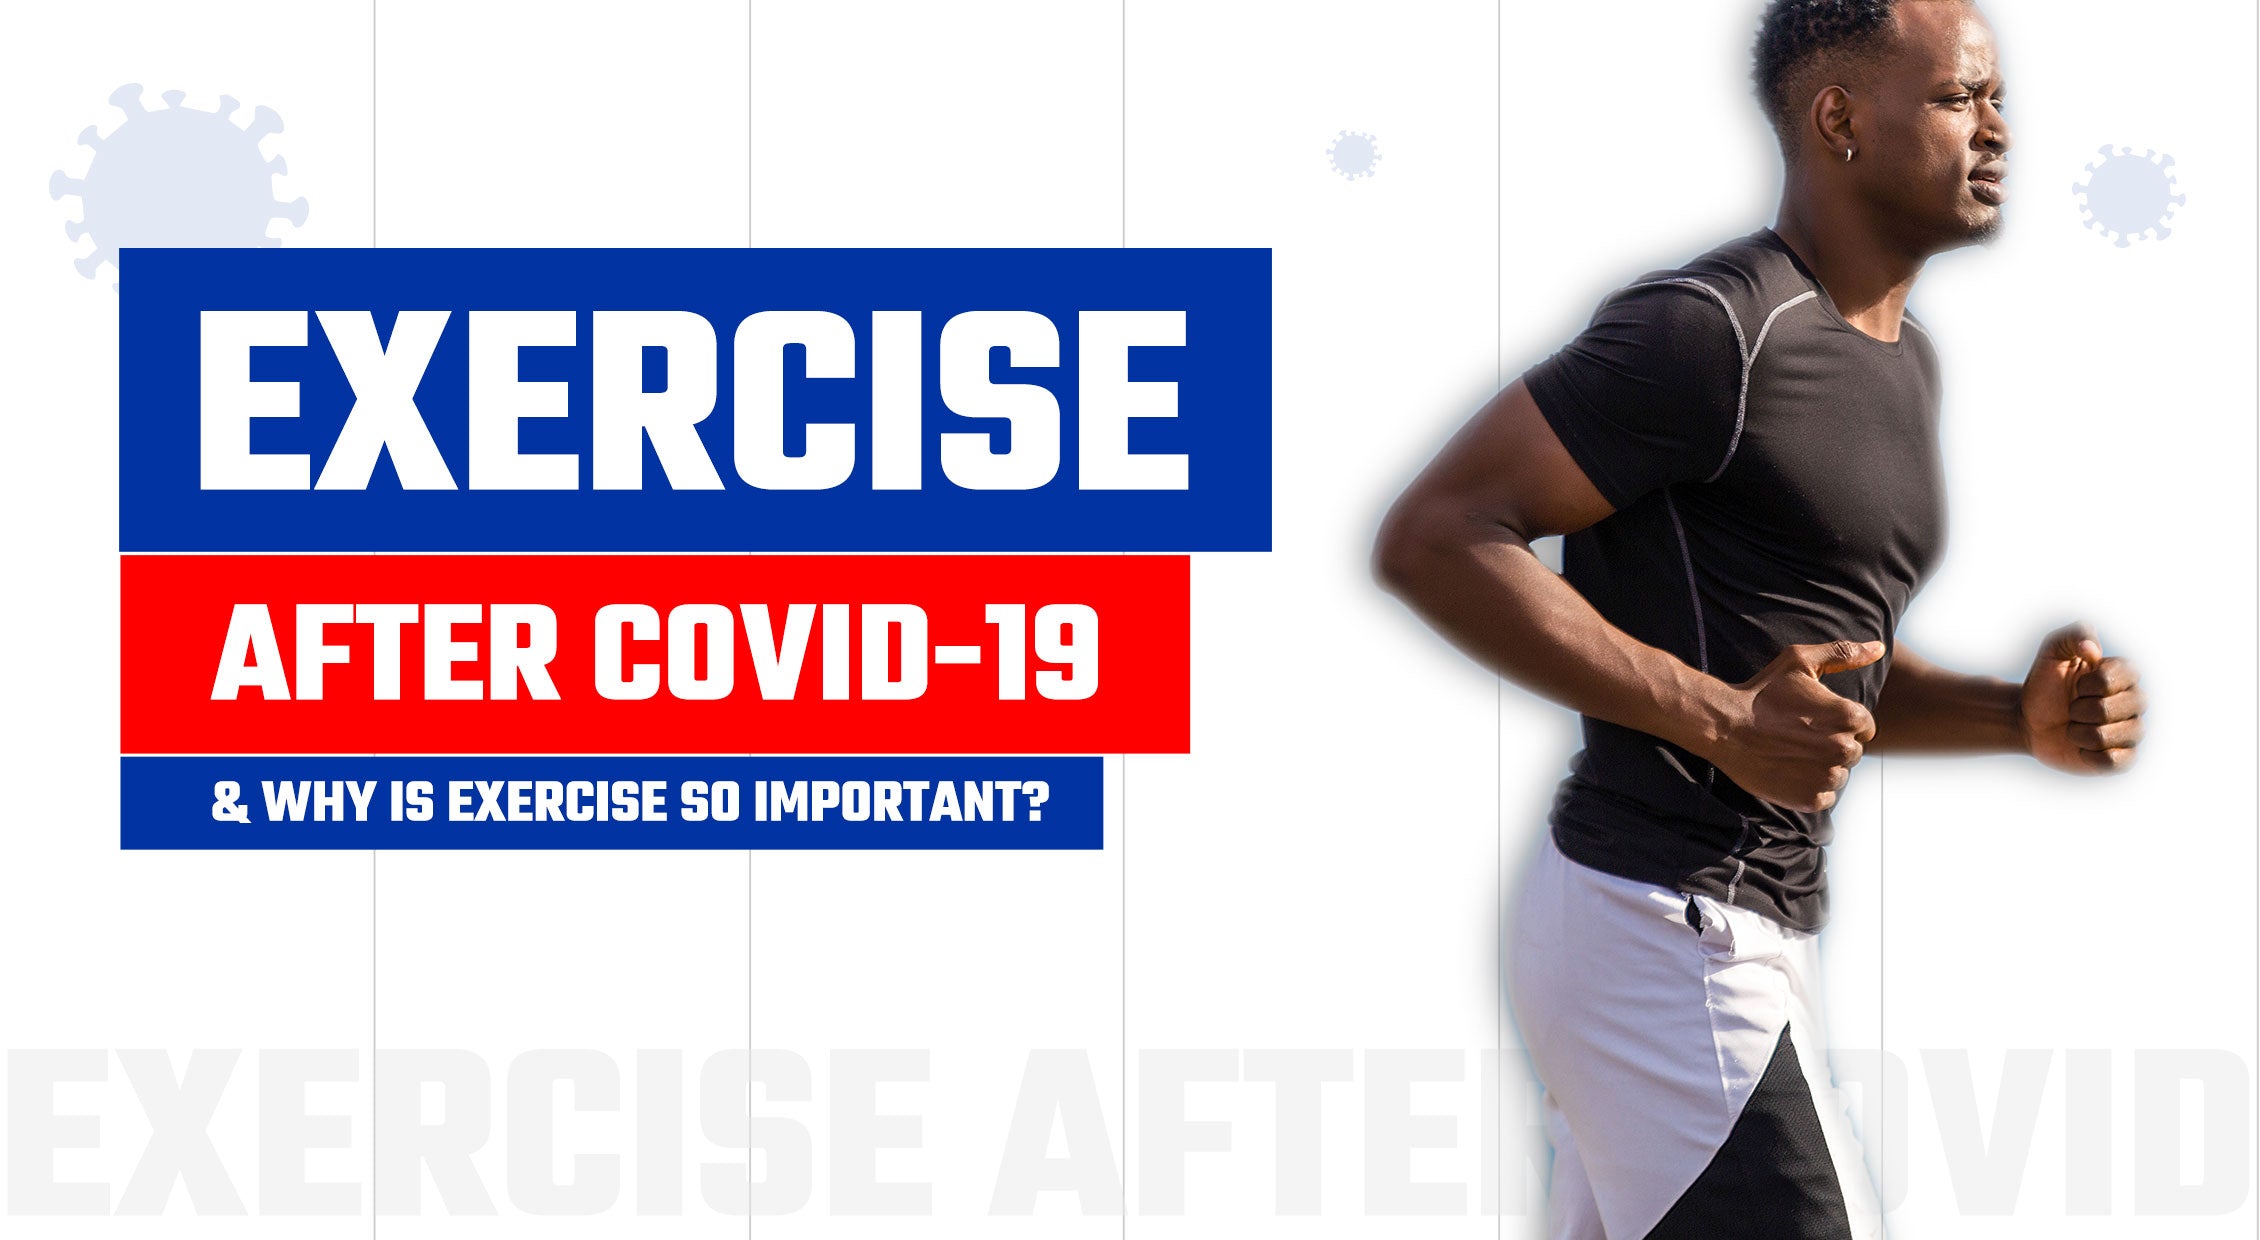 Exercise after Covid